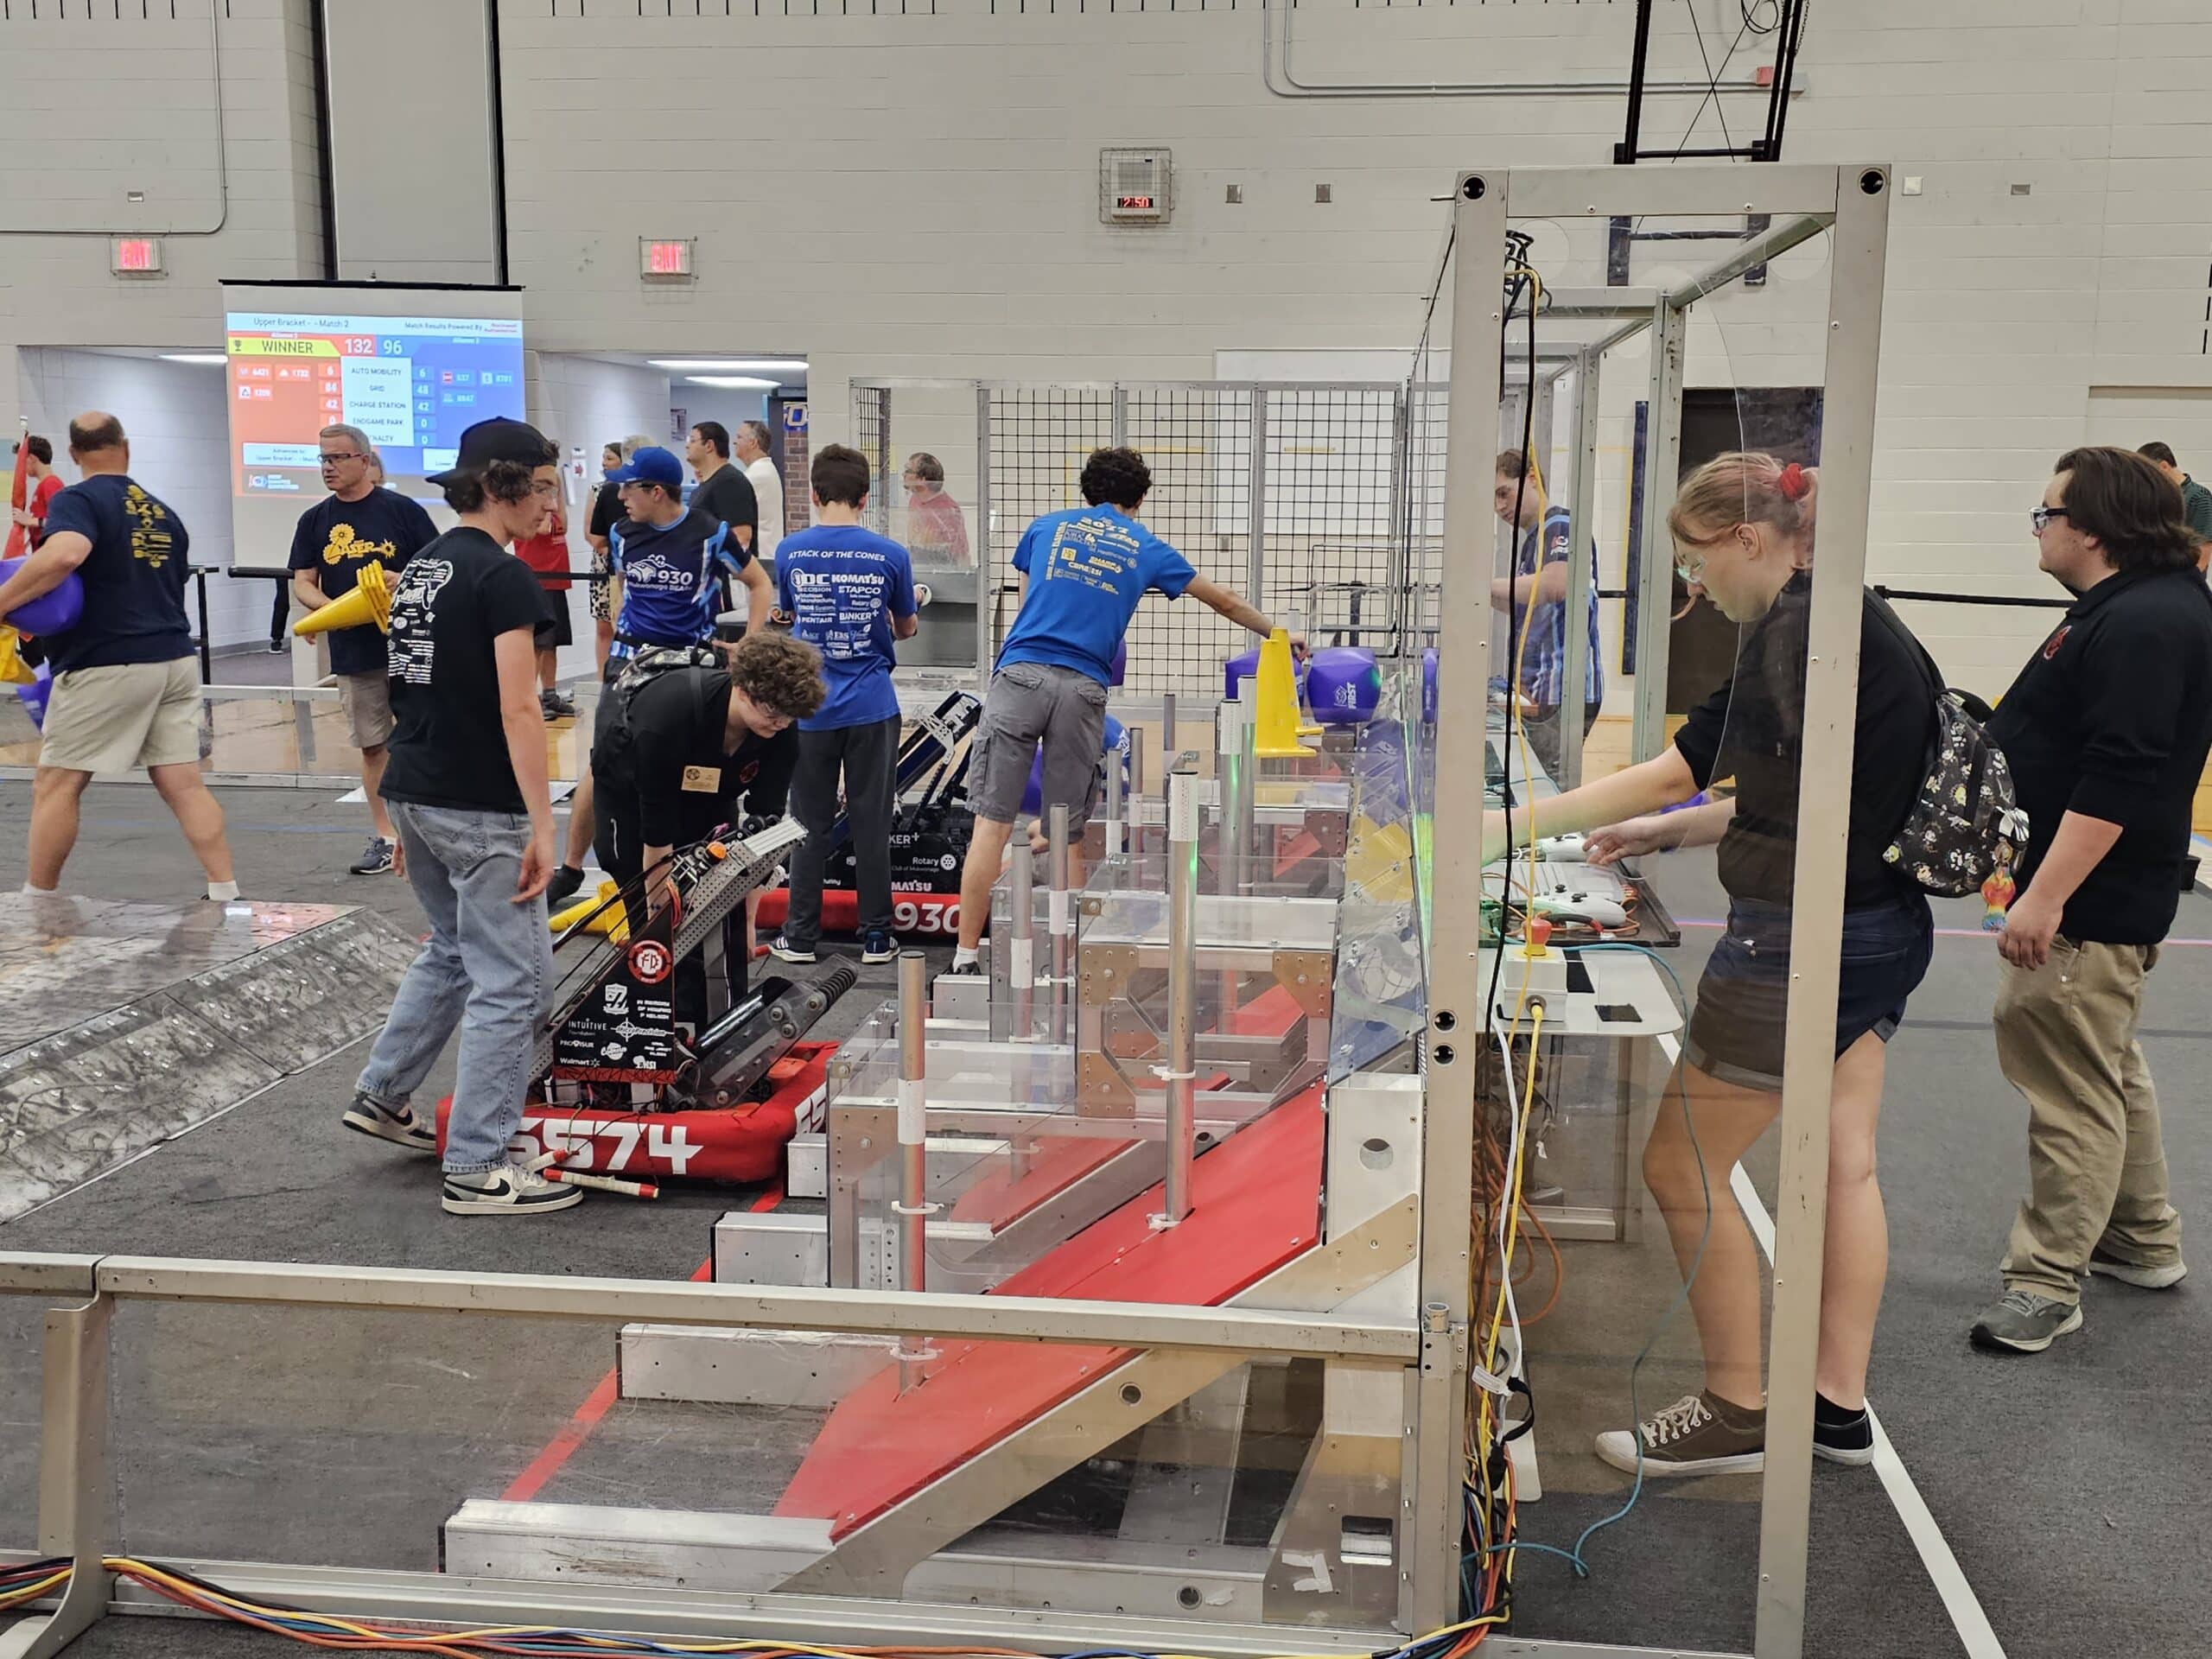 Drive Team Members Andrew O'Toole, Ace Hudec, and Erison Dreksler set up the robot for a qualification match